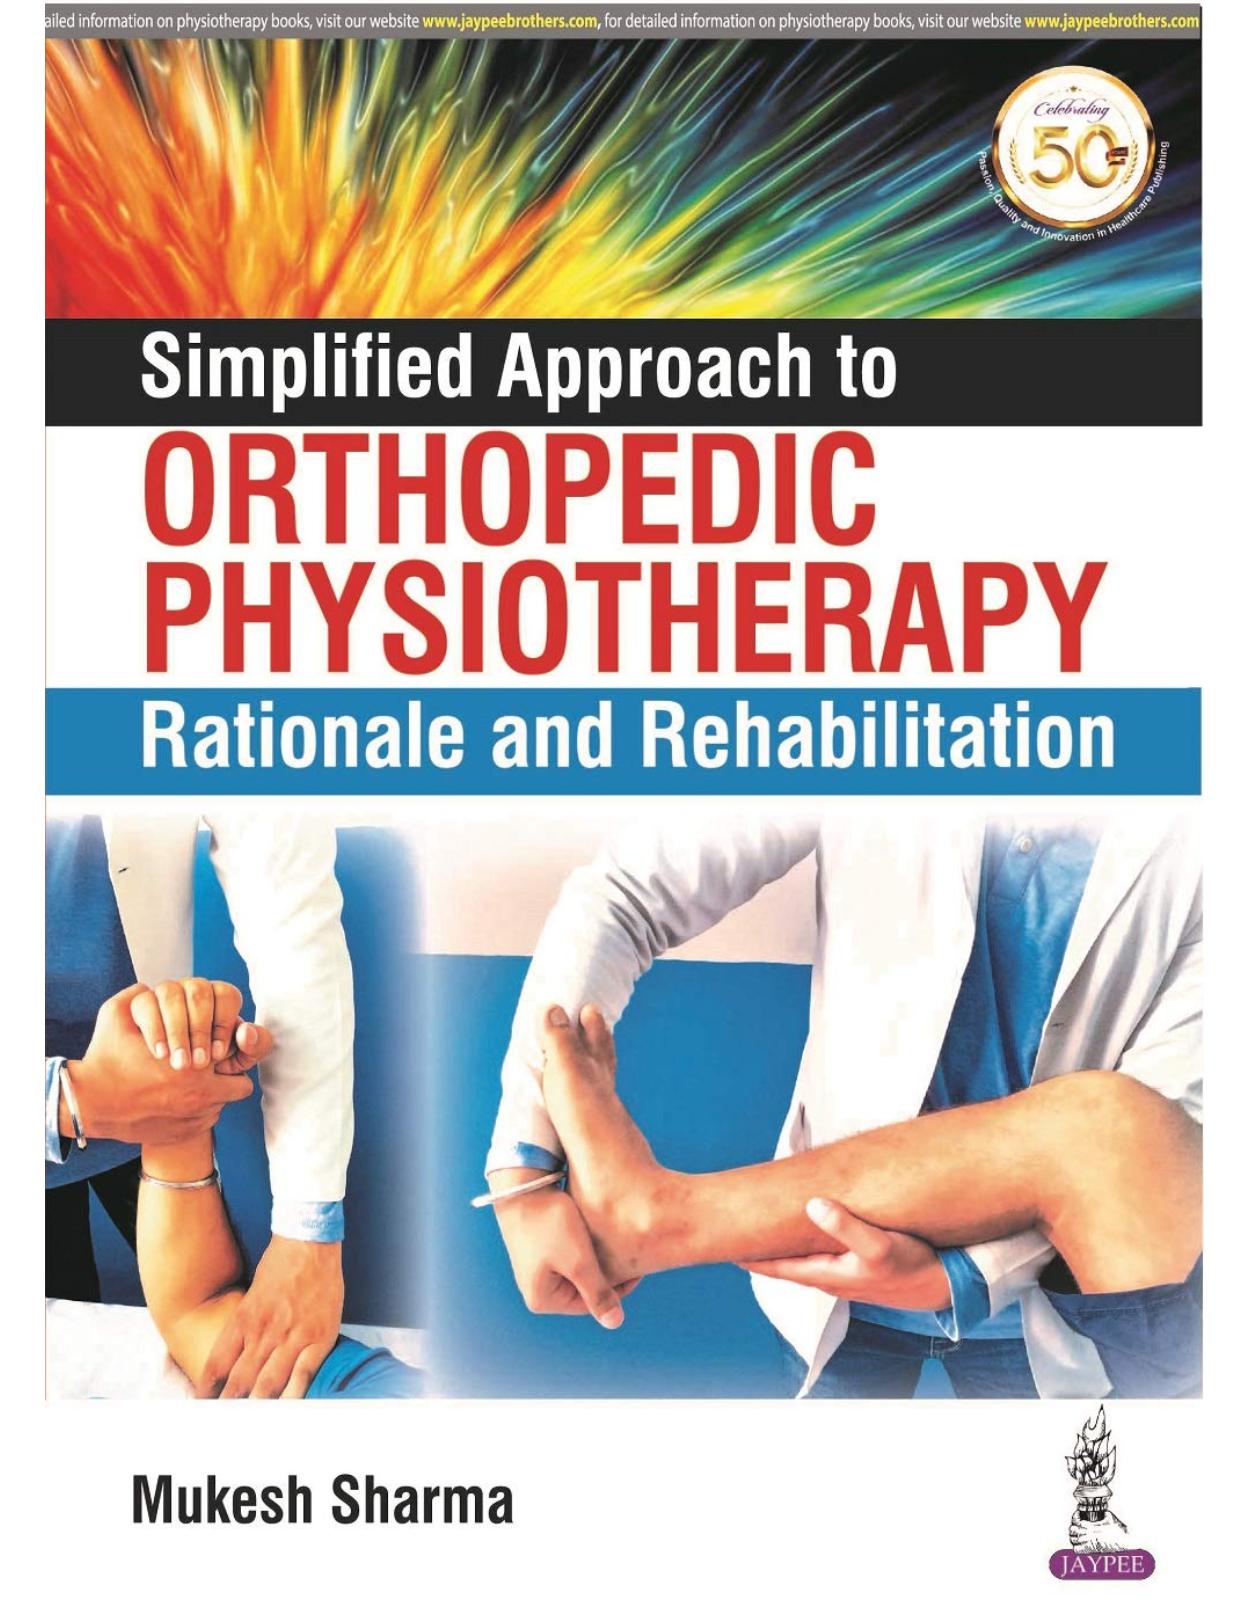 Simplified Approach to Orthopedic Physiotherapy